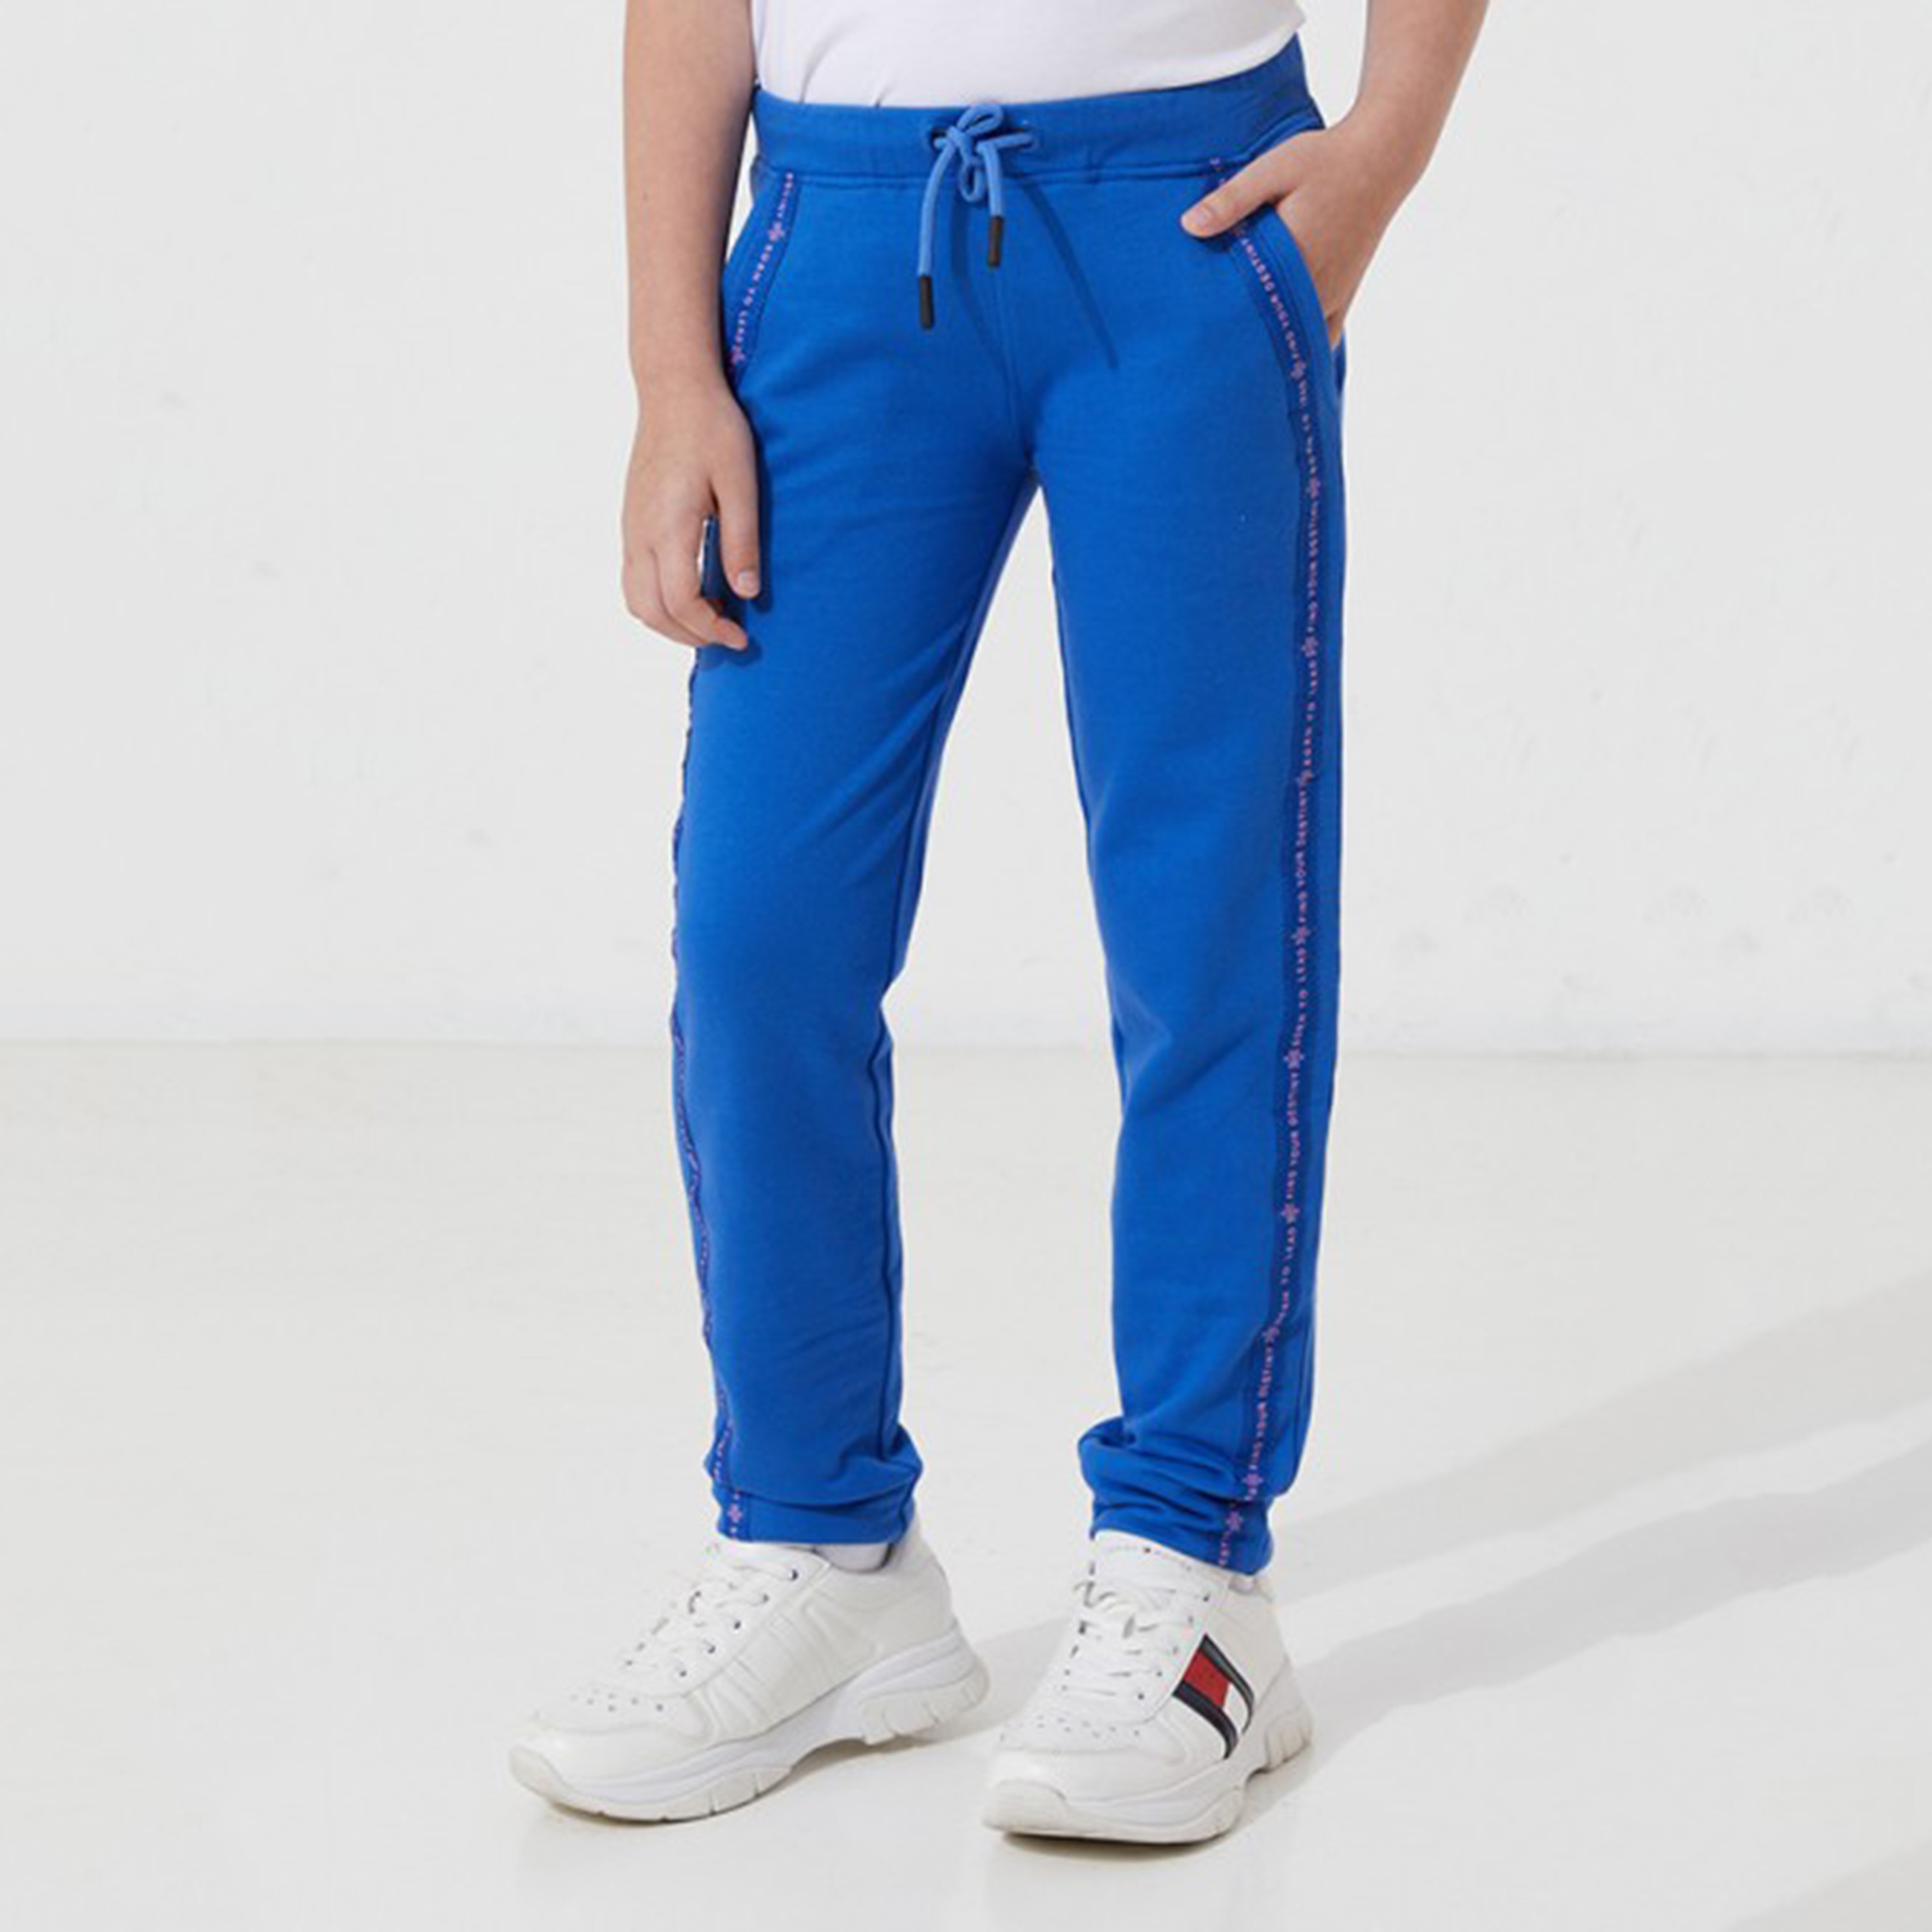 Aeropostale track pants (with ankle zippers!) | Ankle zipper, Clothes  design, Track pants